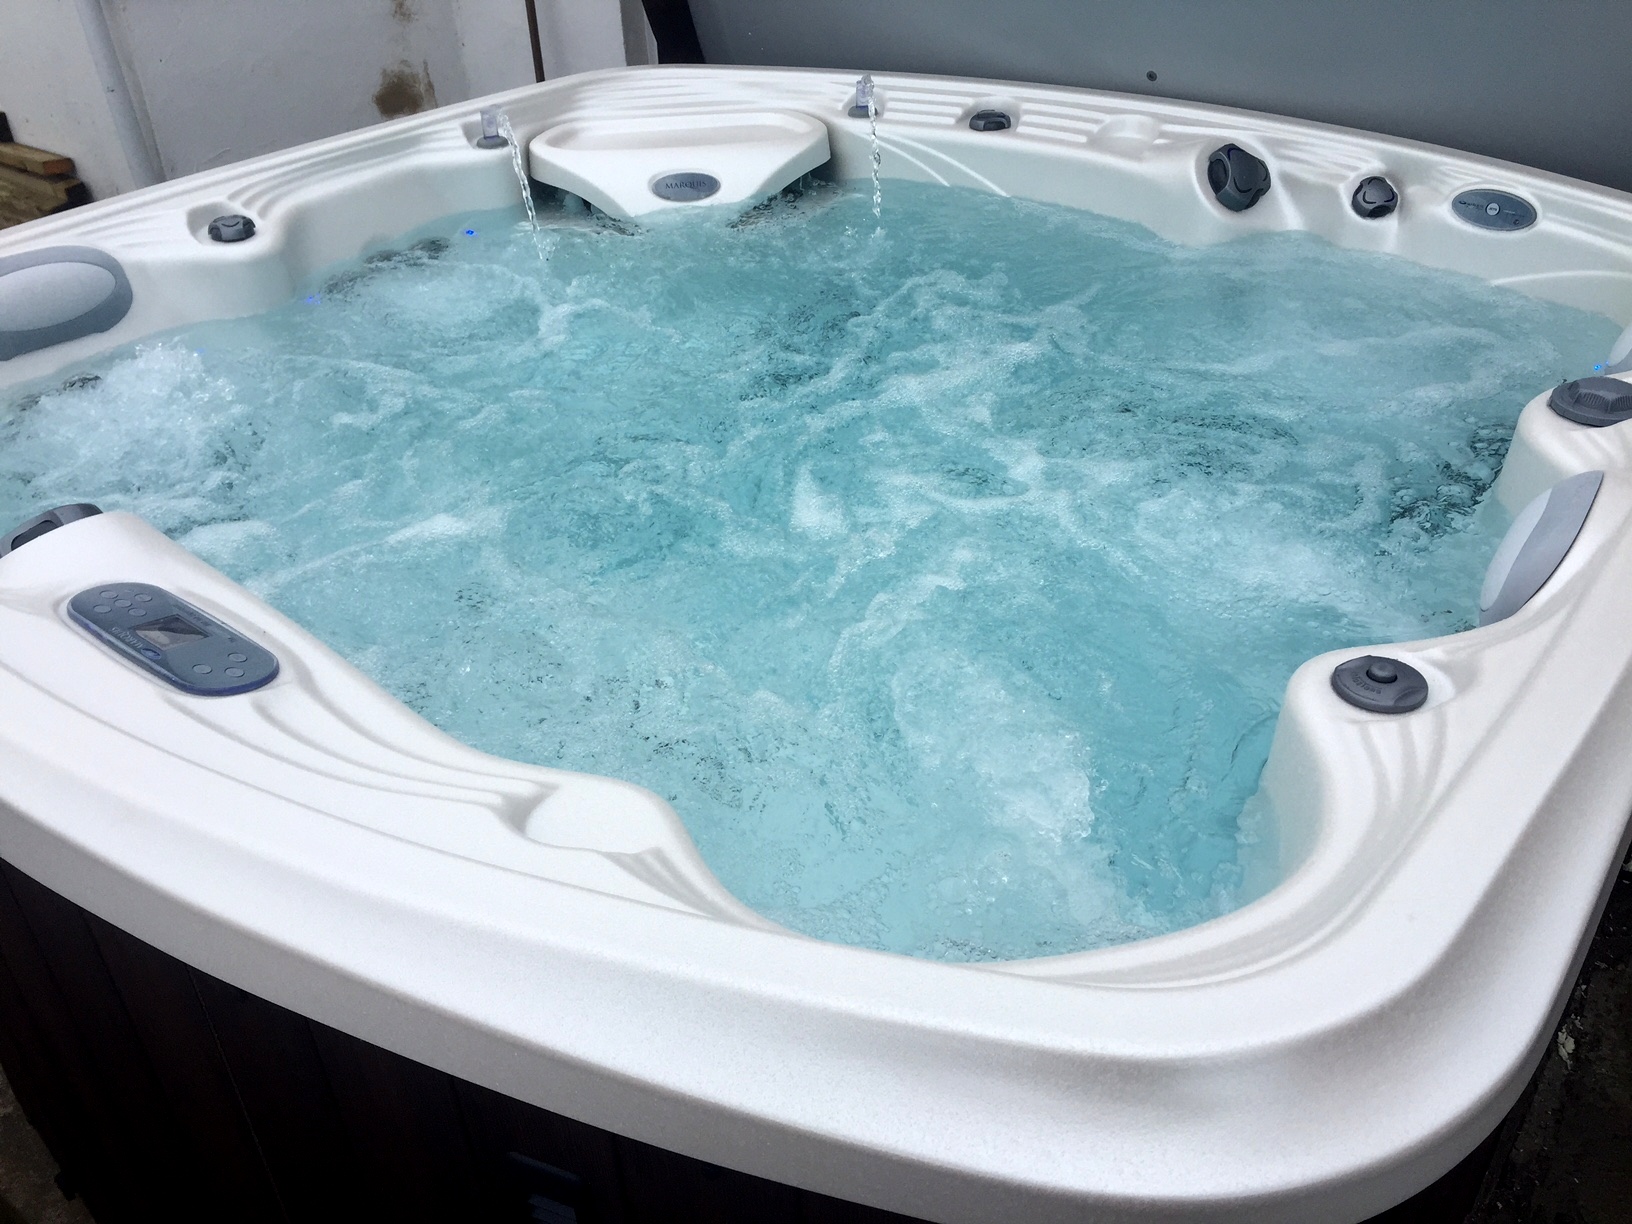 Marquis Spas Crown Euphoria Hot Tub close up image with jets on